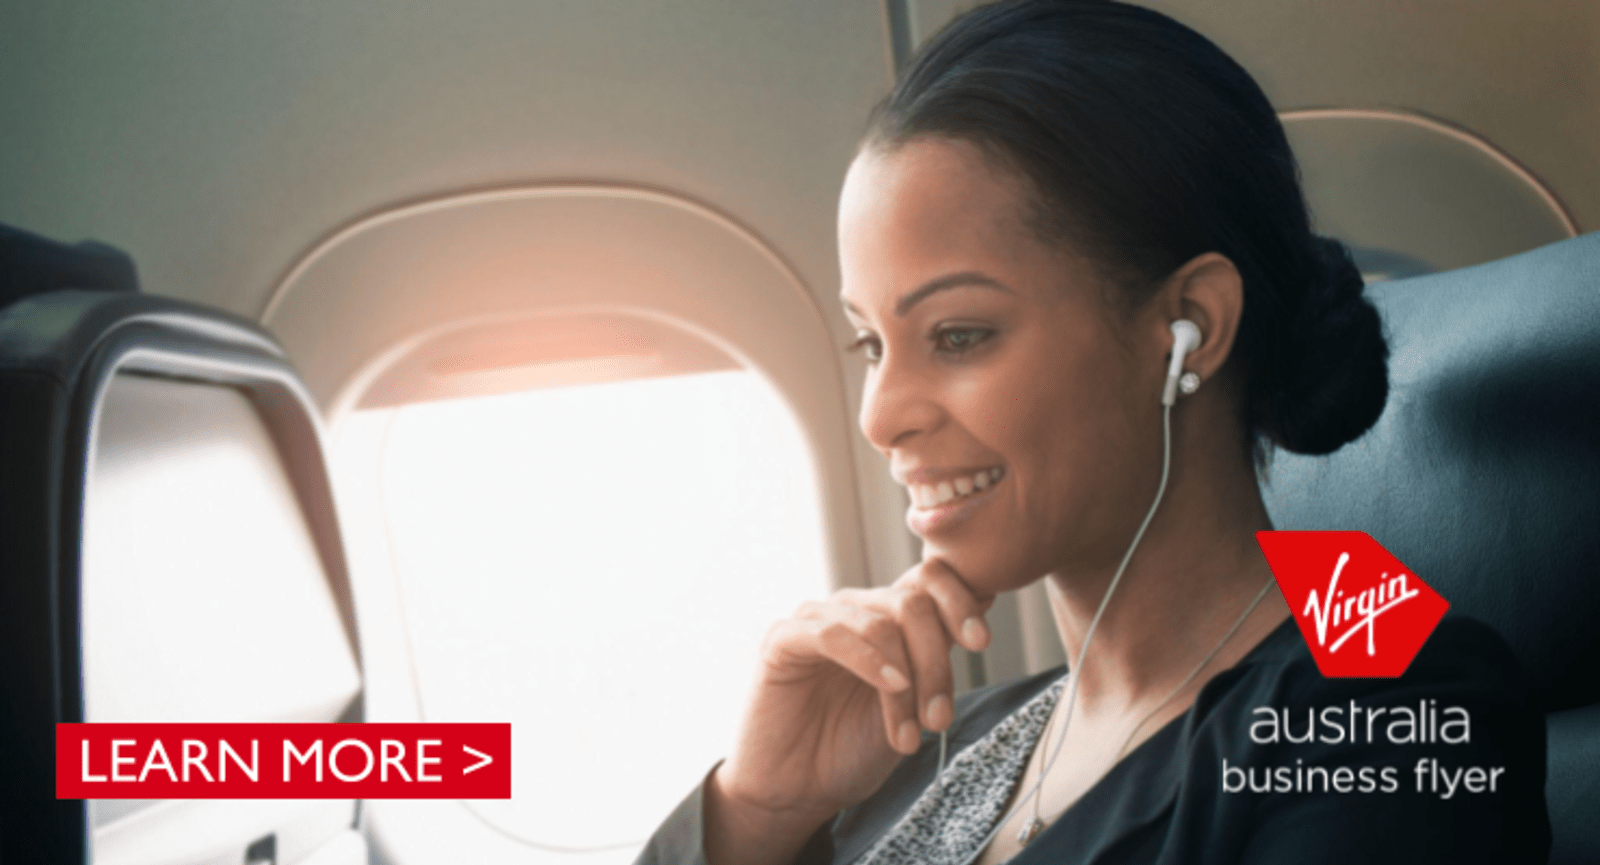 Woman with headphones watching something on a plane. Virgin Australia business flyer